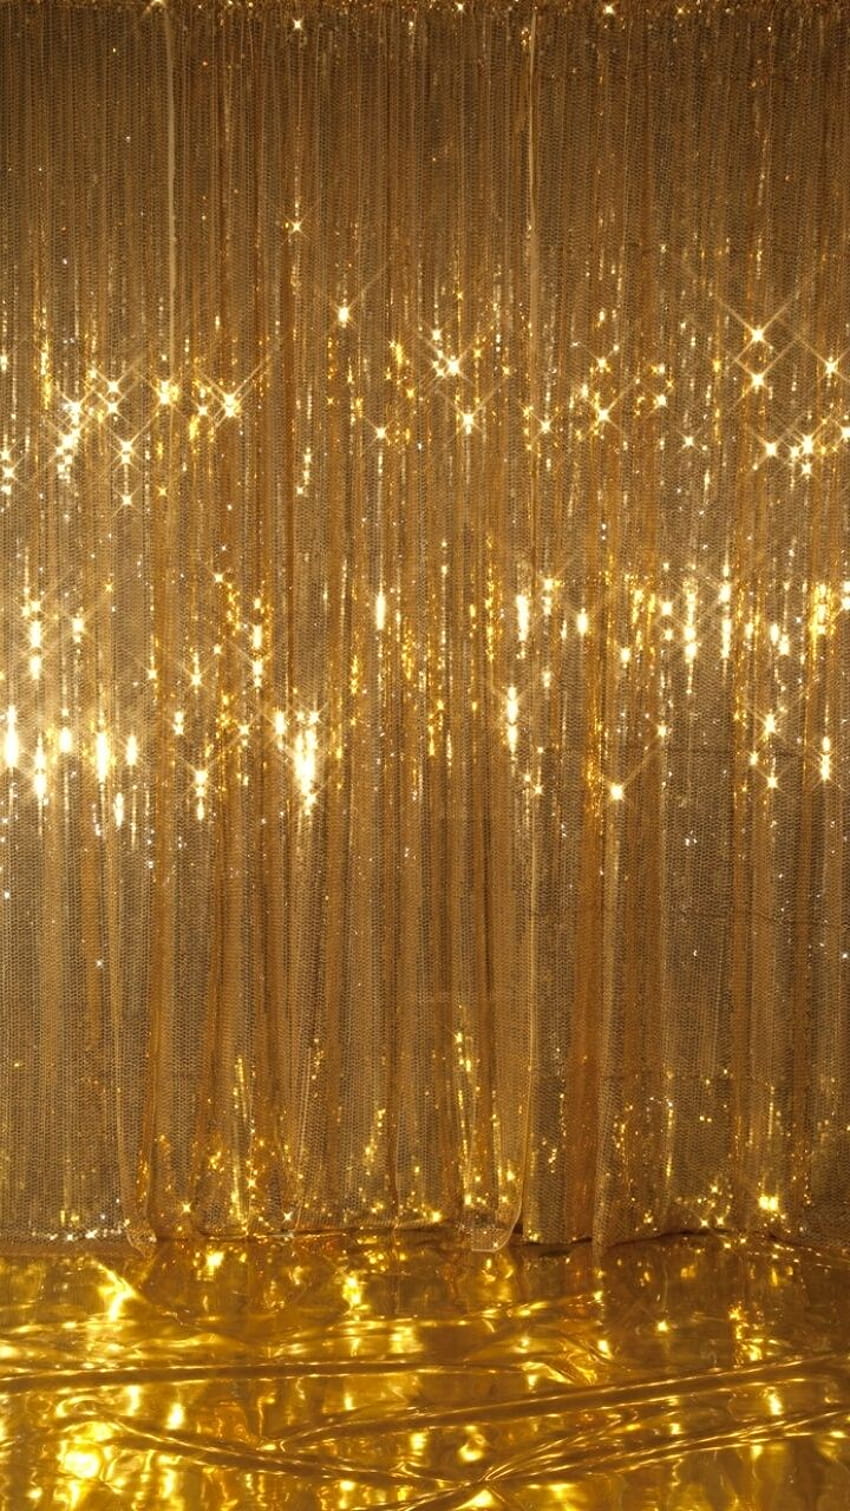 art, background, beautiful, beauty, color, colorful, design, fashion, fashionable, girly, glitter, gold, inspiration, iphone, lights, luxury, pastel, pattern, patterns, pretty, sparkles, style, texture, we heart it, woman, yellow HD phone wallpaper